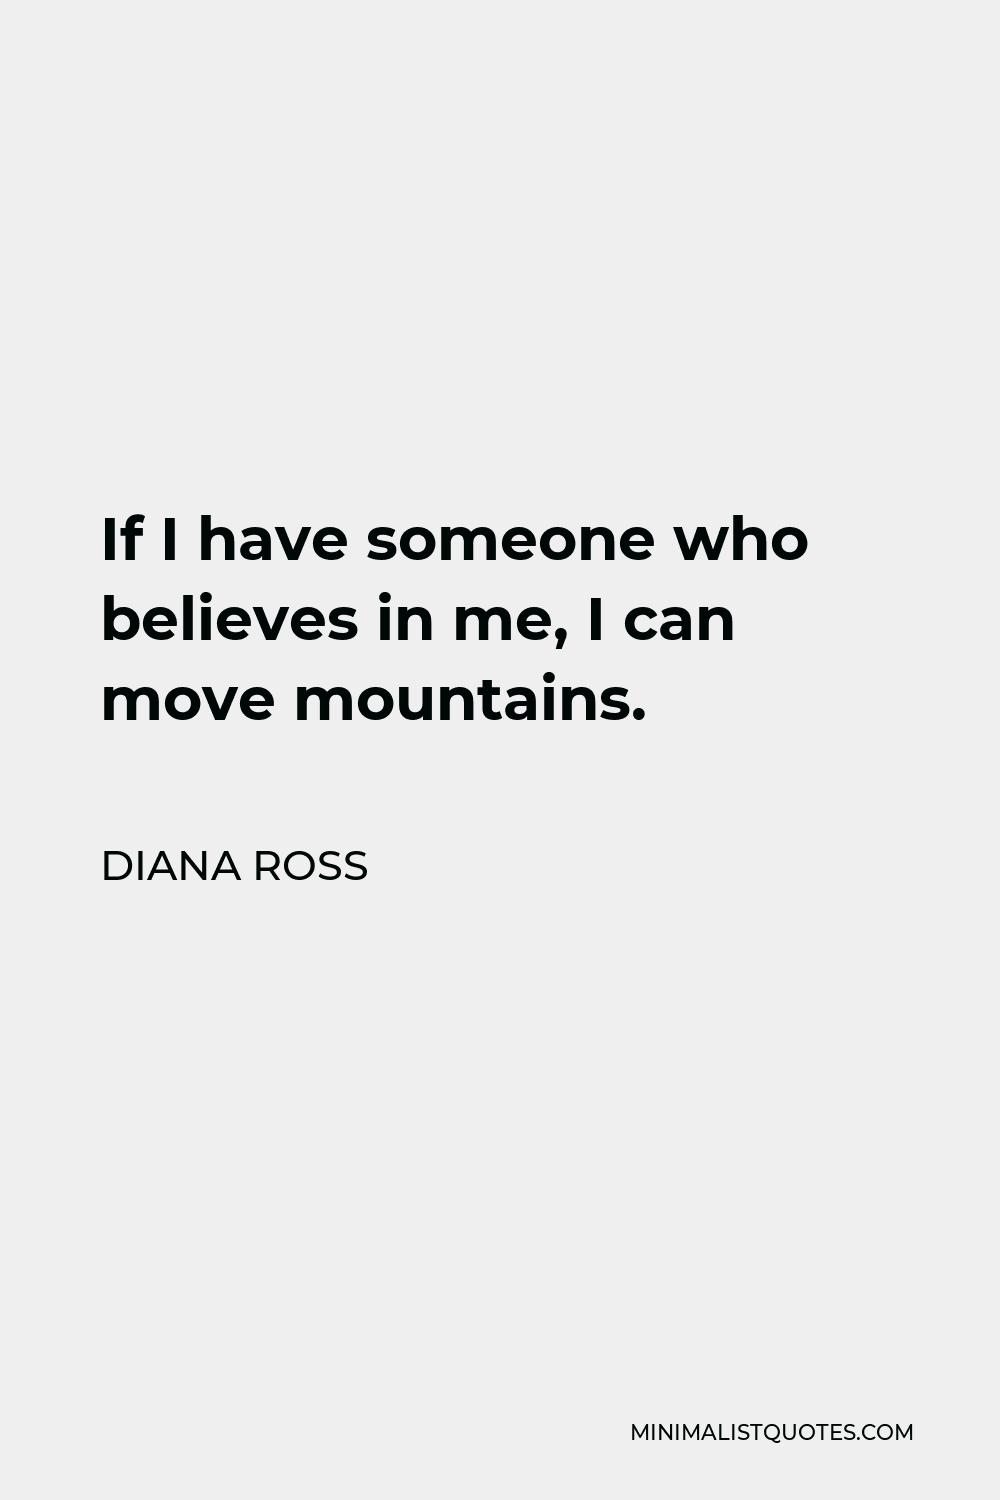 Diana Ross Quote - If I have someone who believes in me, I can move mountains.